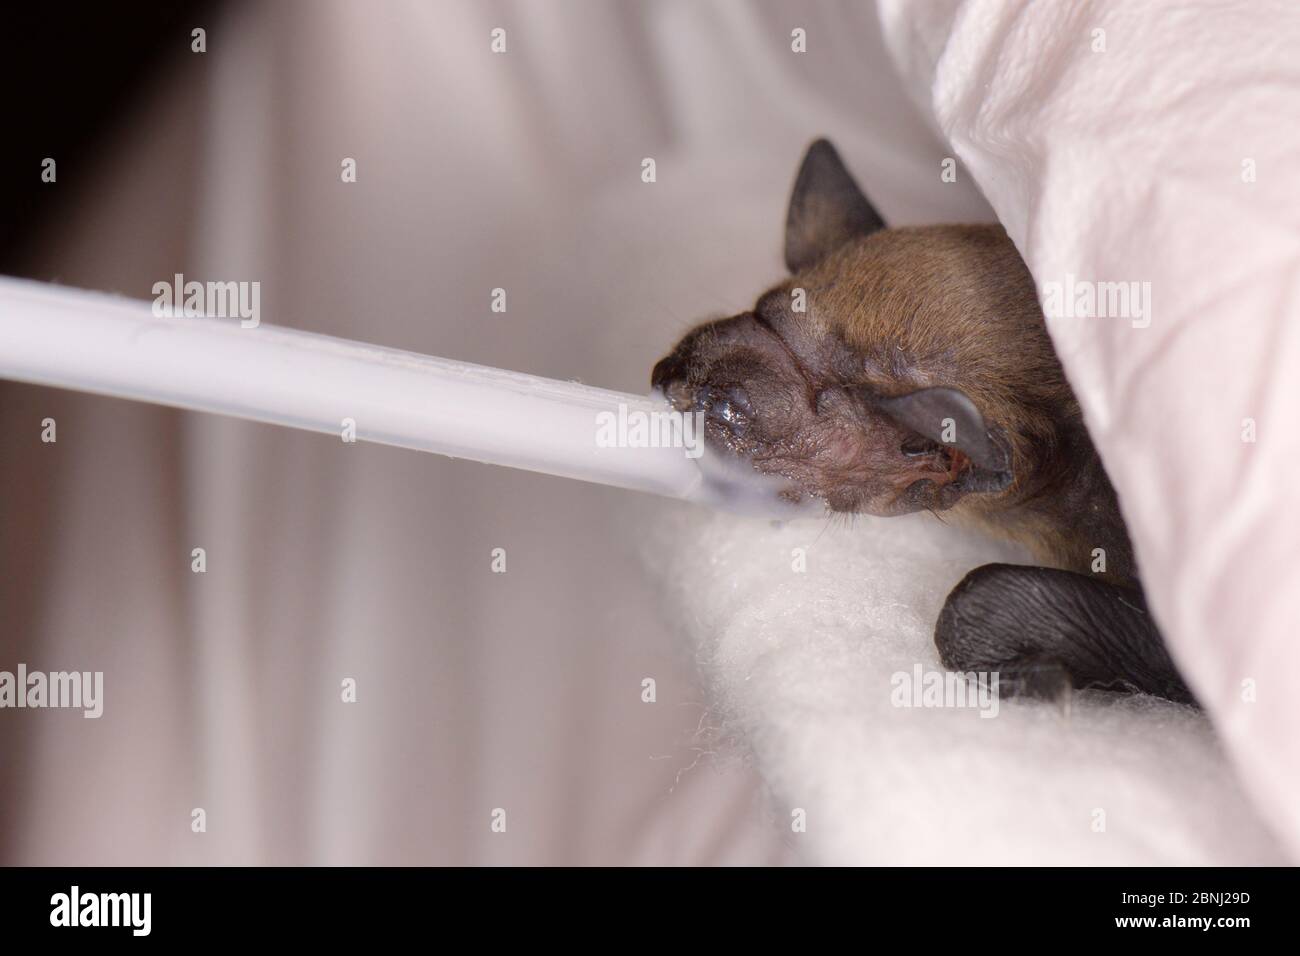 Rescued week old abandoned Common pipistrelle bat pup (Pipistrellus pipistrellus) being fed with goat's milk from a pipette, North Devon Bat Care, Bar Stock Photo